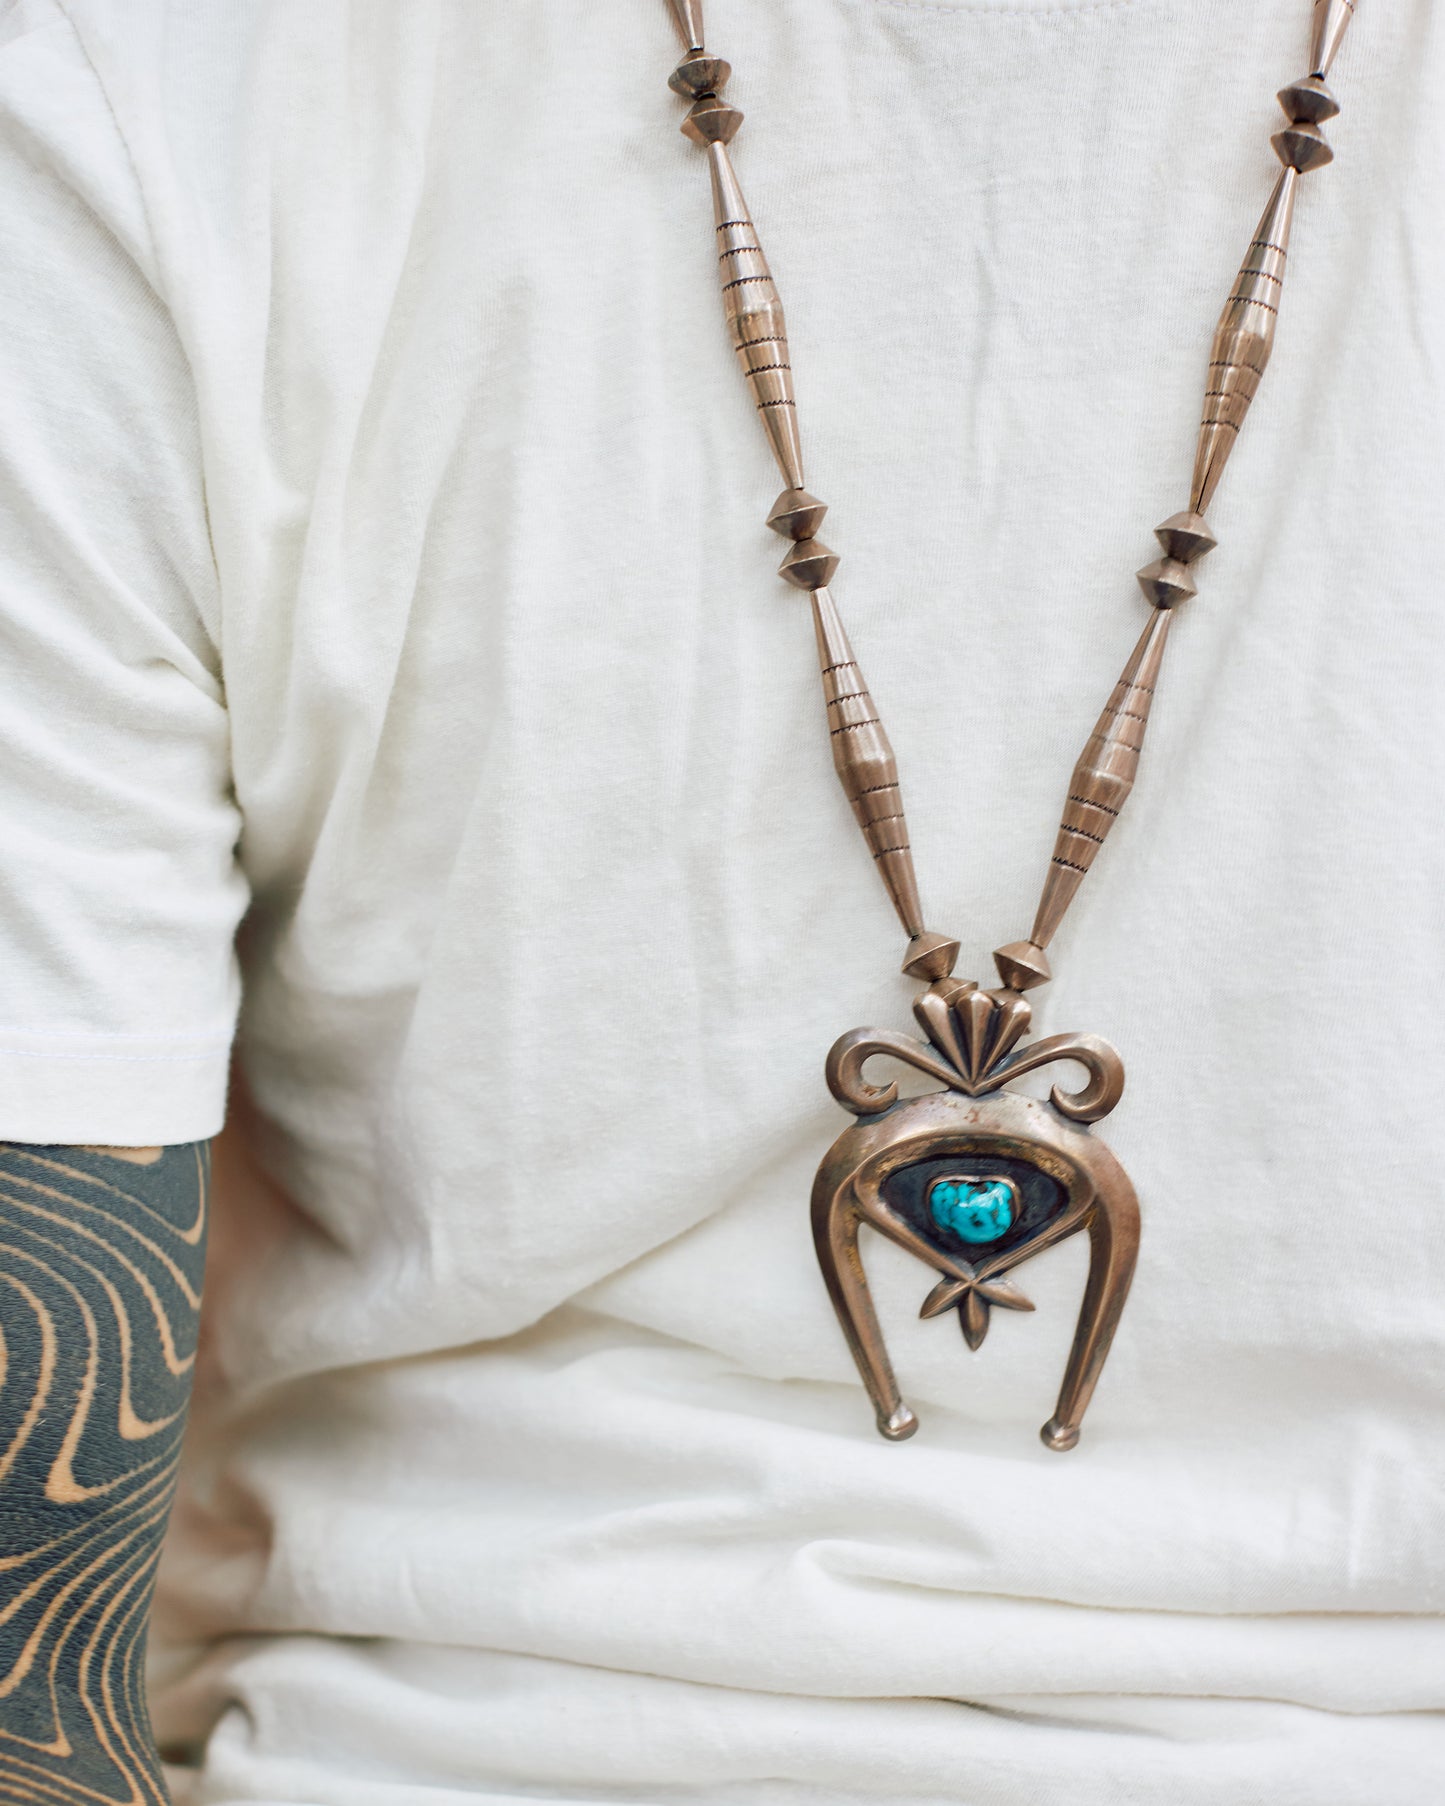 A vintage Native American squash blossom necklace with hand formed beads and a turquoise at the heart of its pendant.